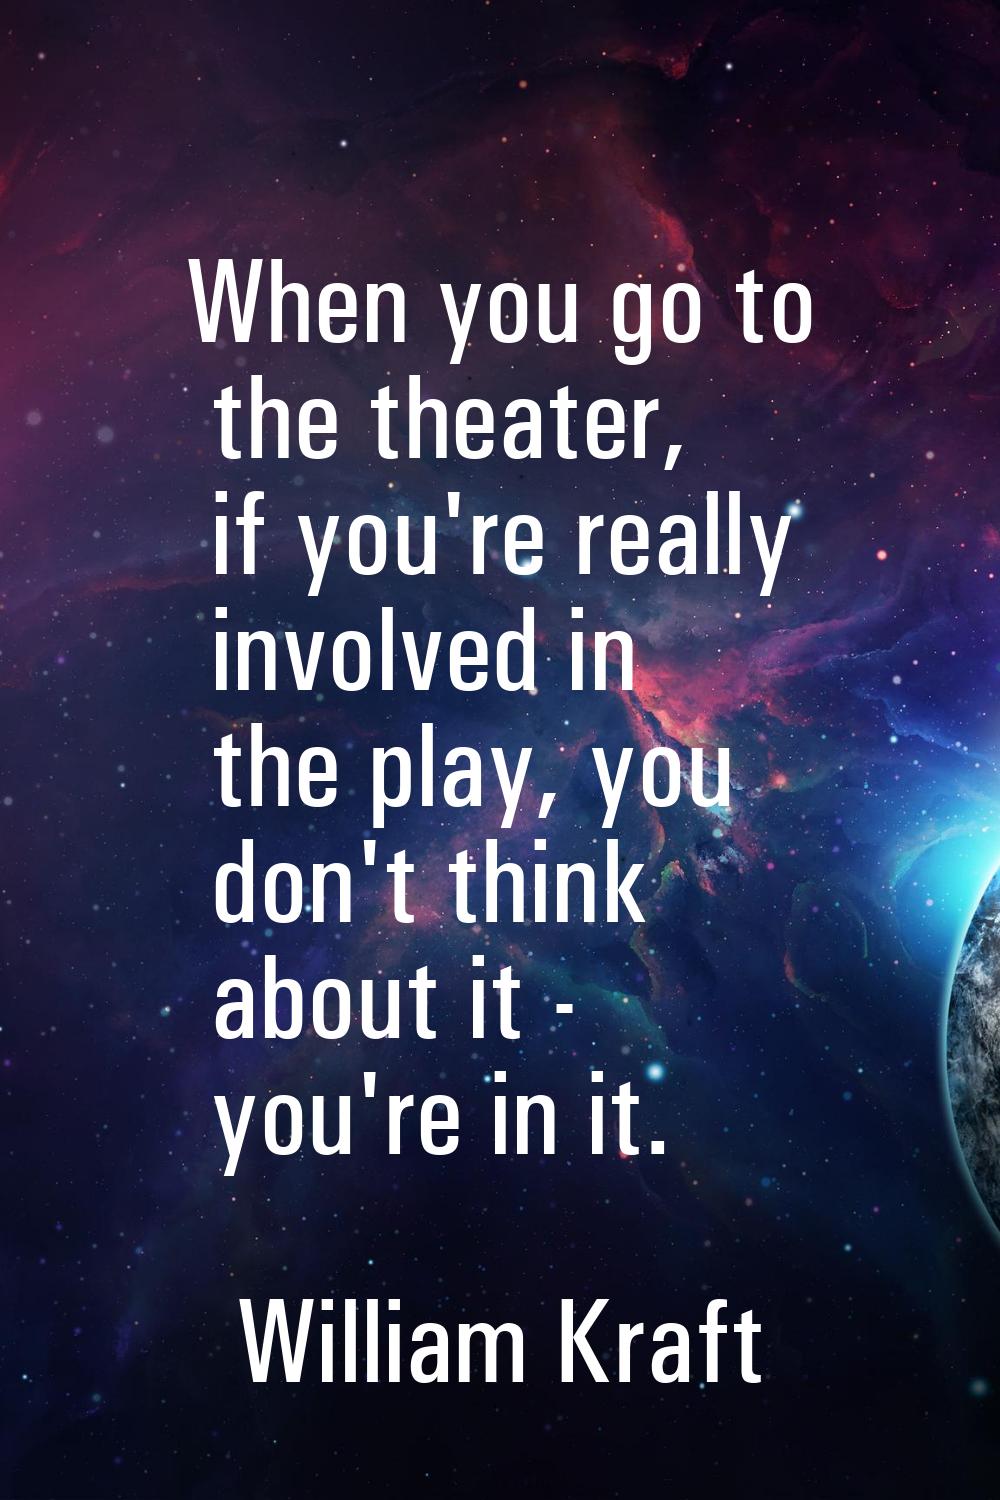 When you go to the theater, if you're really involved in the play, you don't think about it - you'r